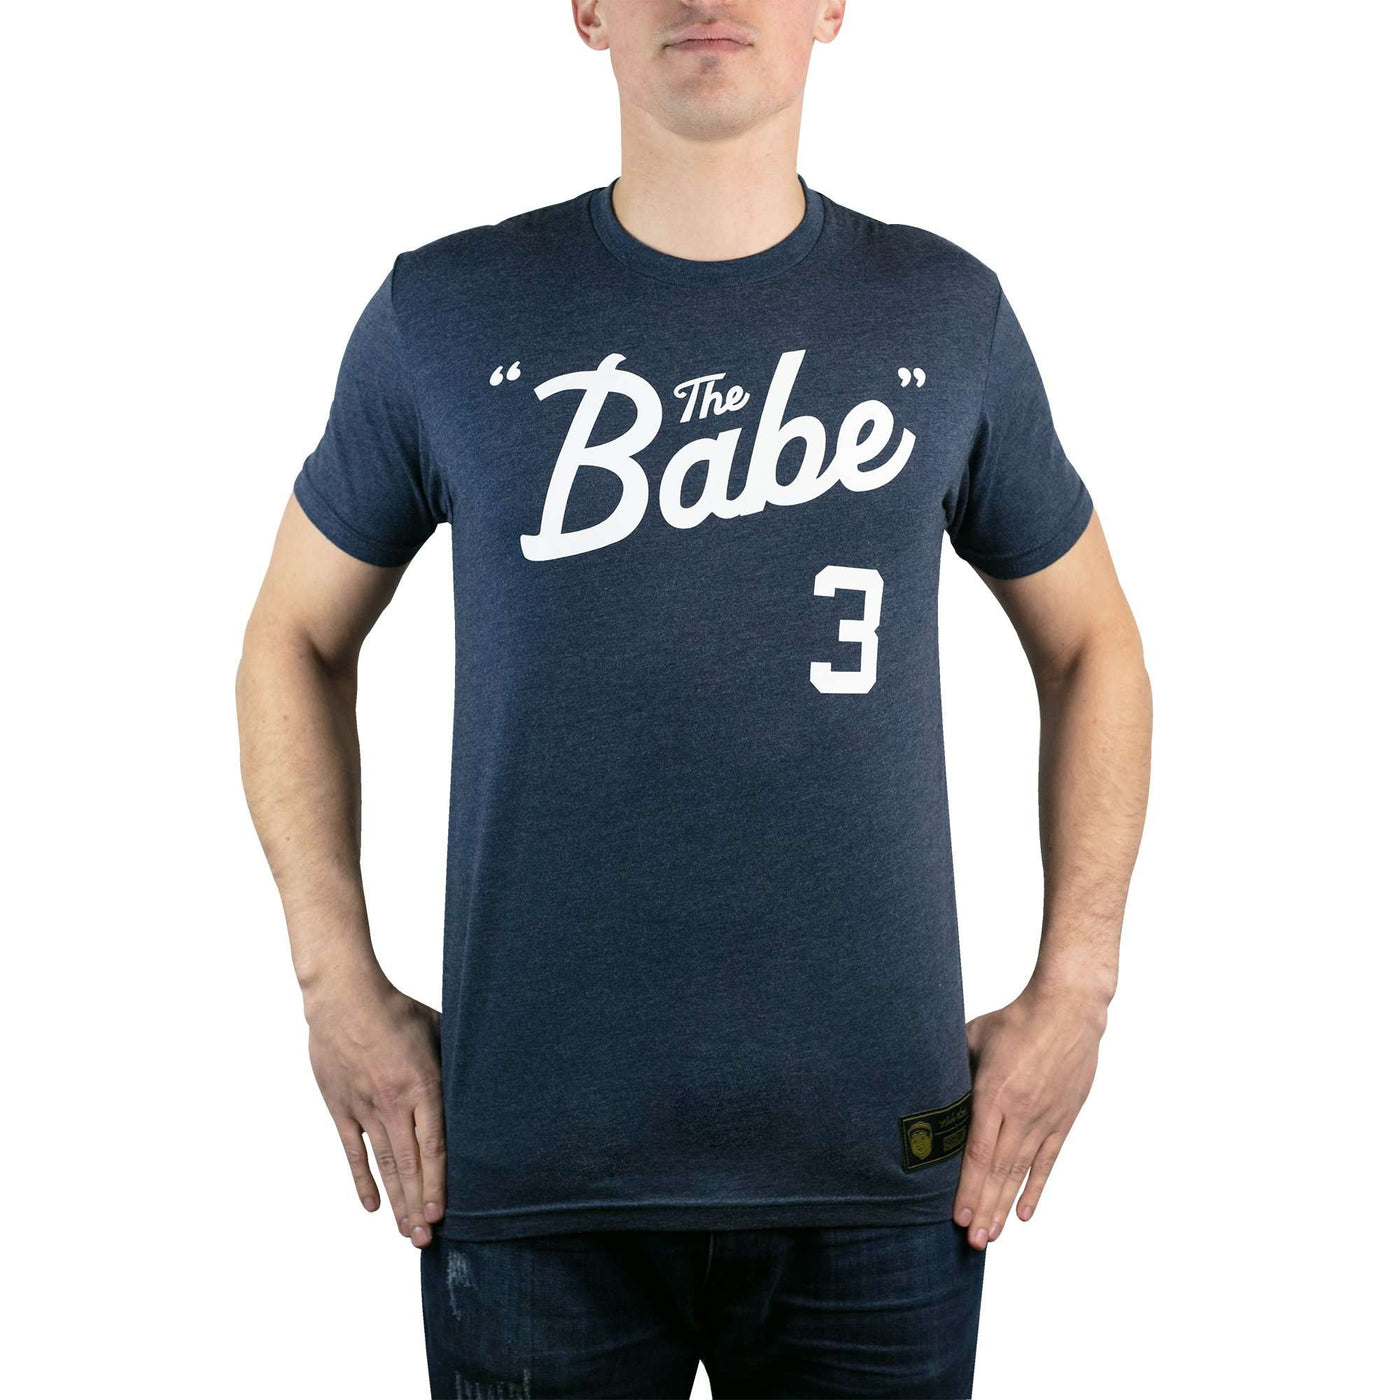 Babe Ruth Youth Jersey